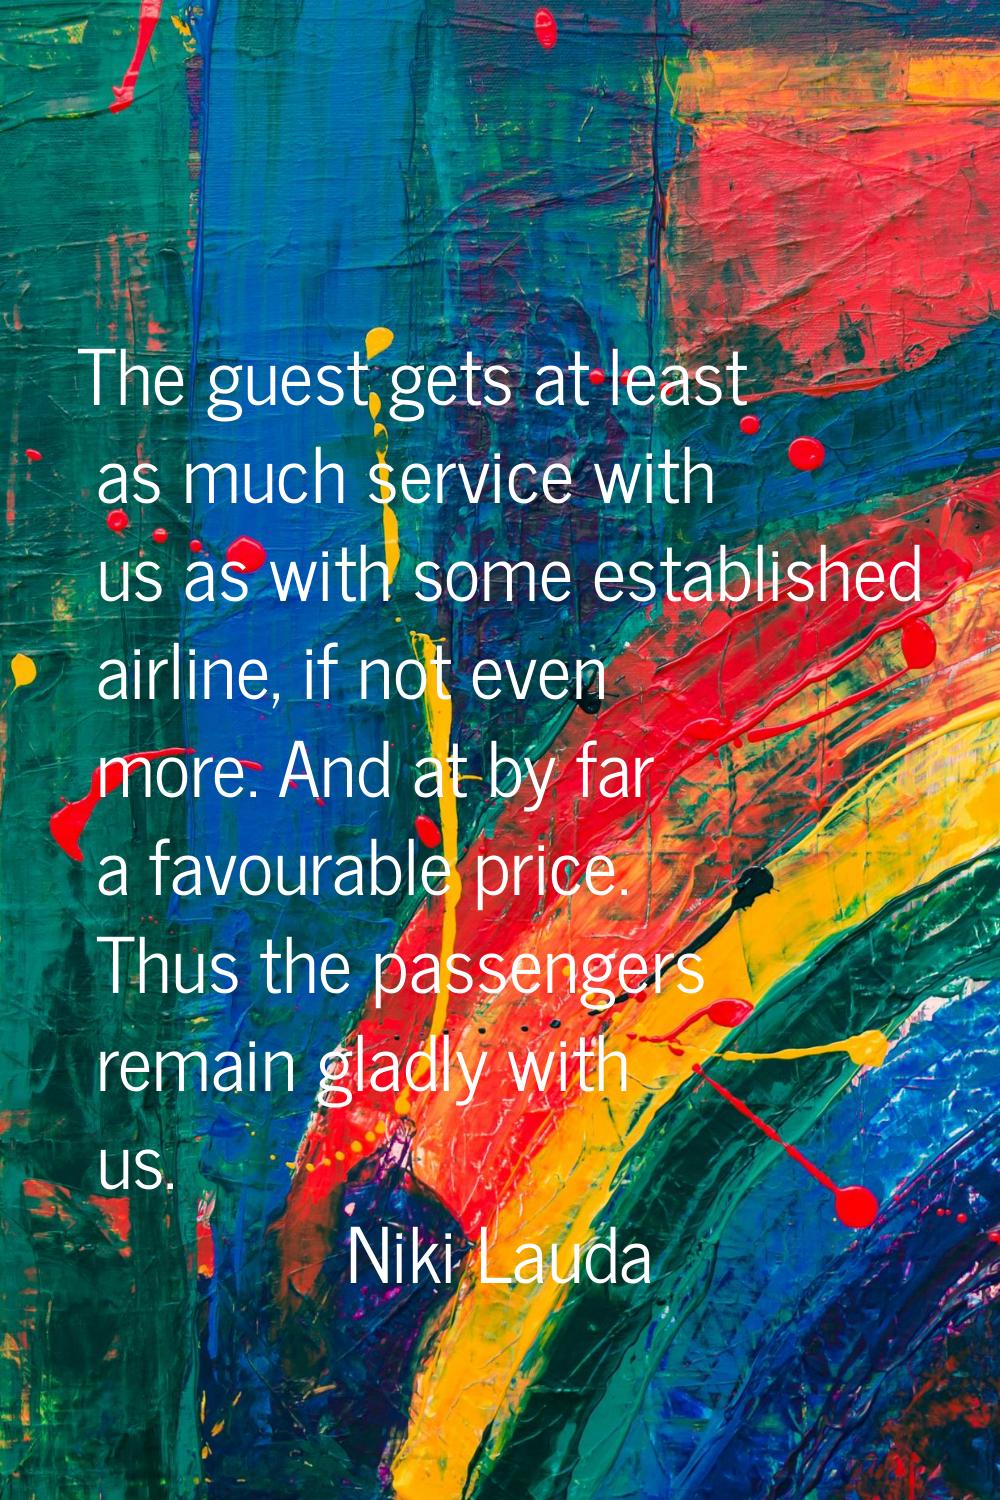 The guest gets at least as much service with us as with some established airline, if not even more.